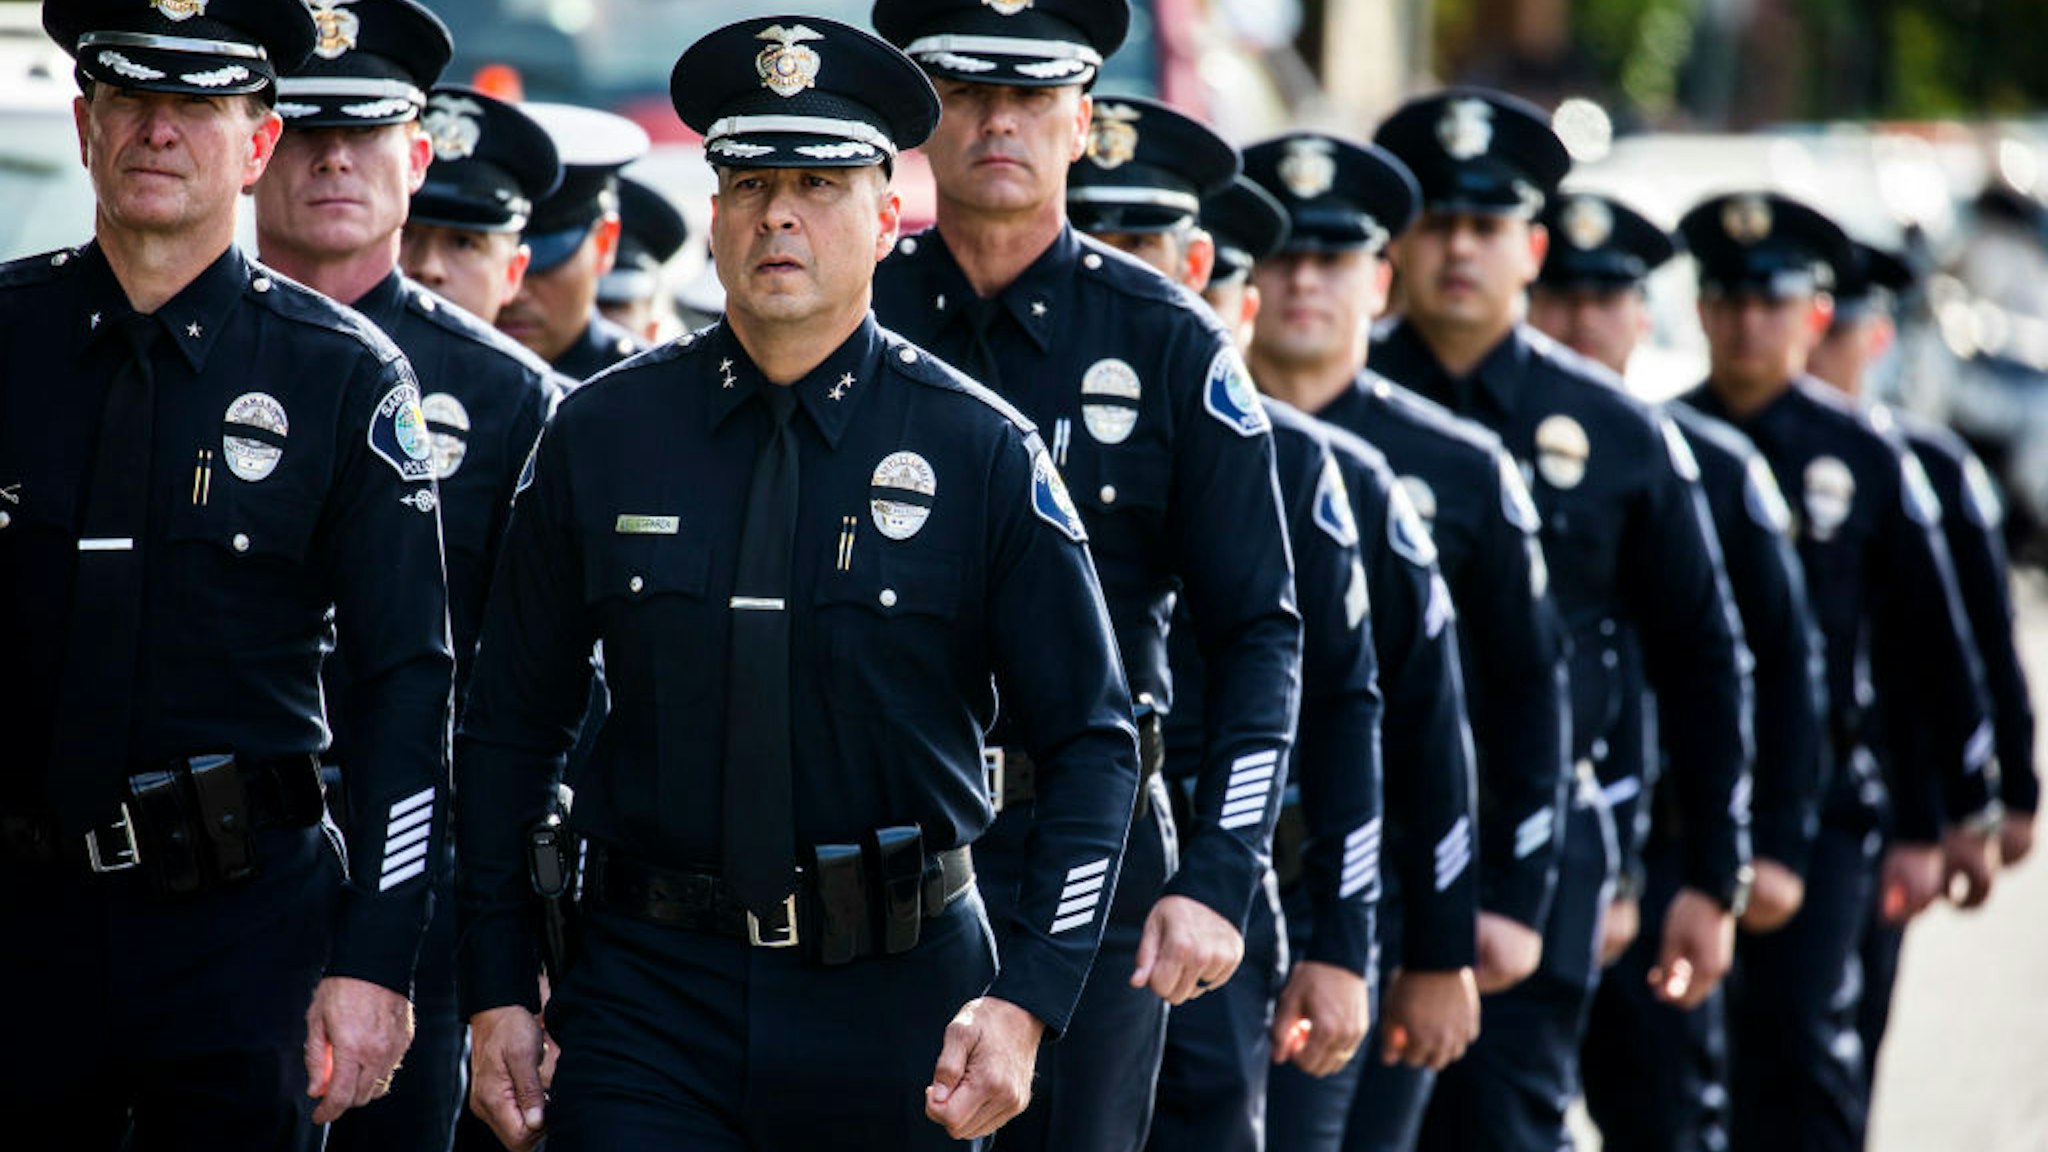 WESTLAKE VILLAGE, CA - NOVEMBER 15: Santa Ana Police Officers leave the service of Sgt. Ron Helus, who was killed Wednesday, Nov. 7, 2018, in a deadly shooting at a country music bar, the Borderline Bar and Grill in Thousand Oaks, Calif., following his memorial service at The Calvary Community Church, on November 15, 2018 in Westlake Village, California. Sgt. Helus was killed in a mass shooting at the Borderline Bar and Grill in Thousand Oaks, California on November 7. (Photo by Barbara Davidson/Getty Images)